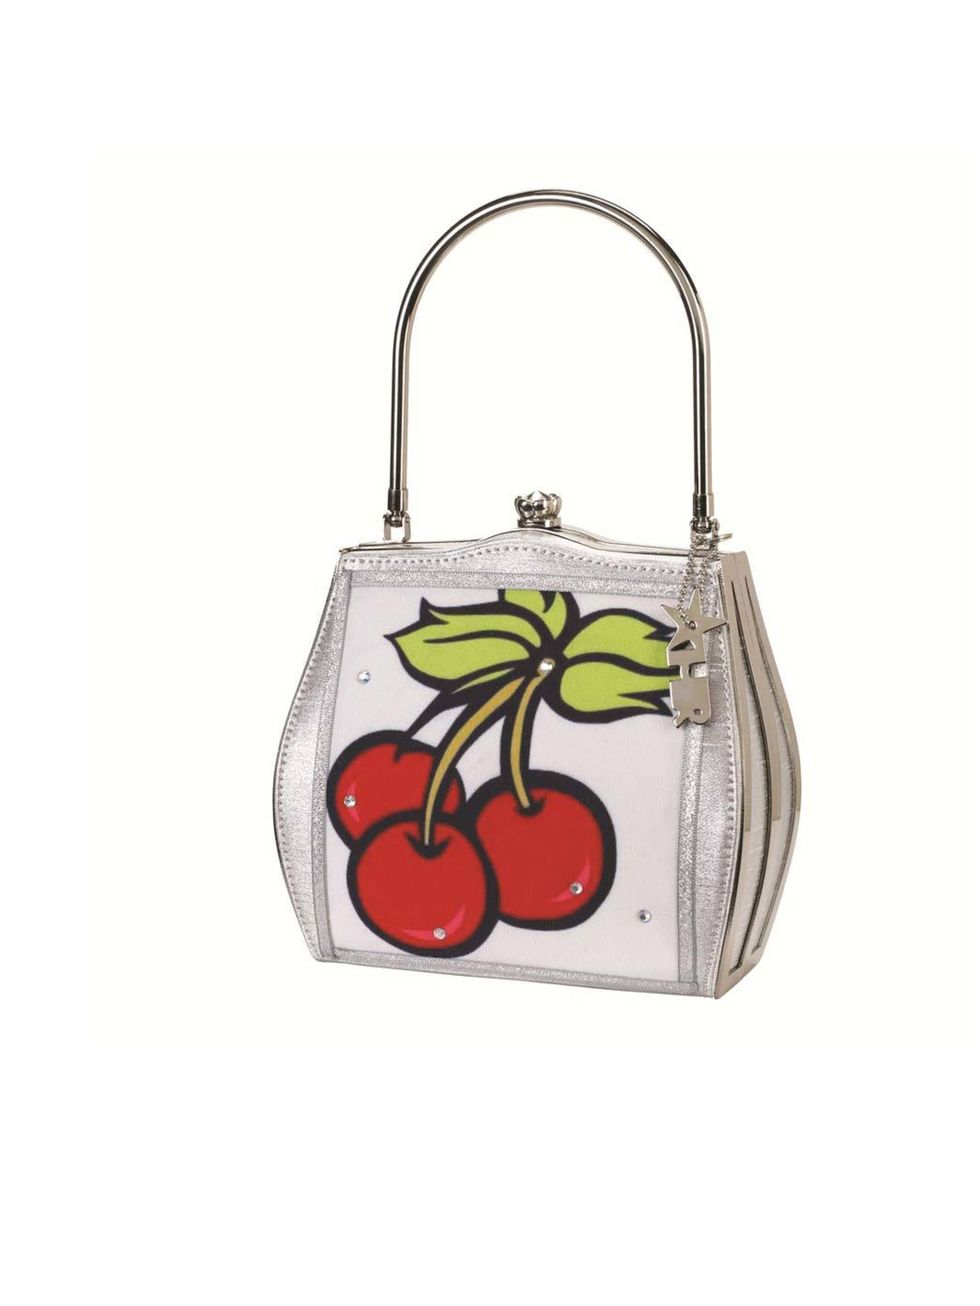 <p><a href="http://helenrochfort.myshopify.com/collections/frontpage/products/helen-rochfort-scented-cherry-handbag">Helen Rochfort</a> scented cherry bag, £65</p>